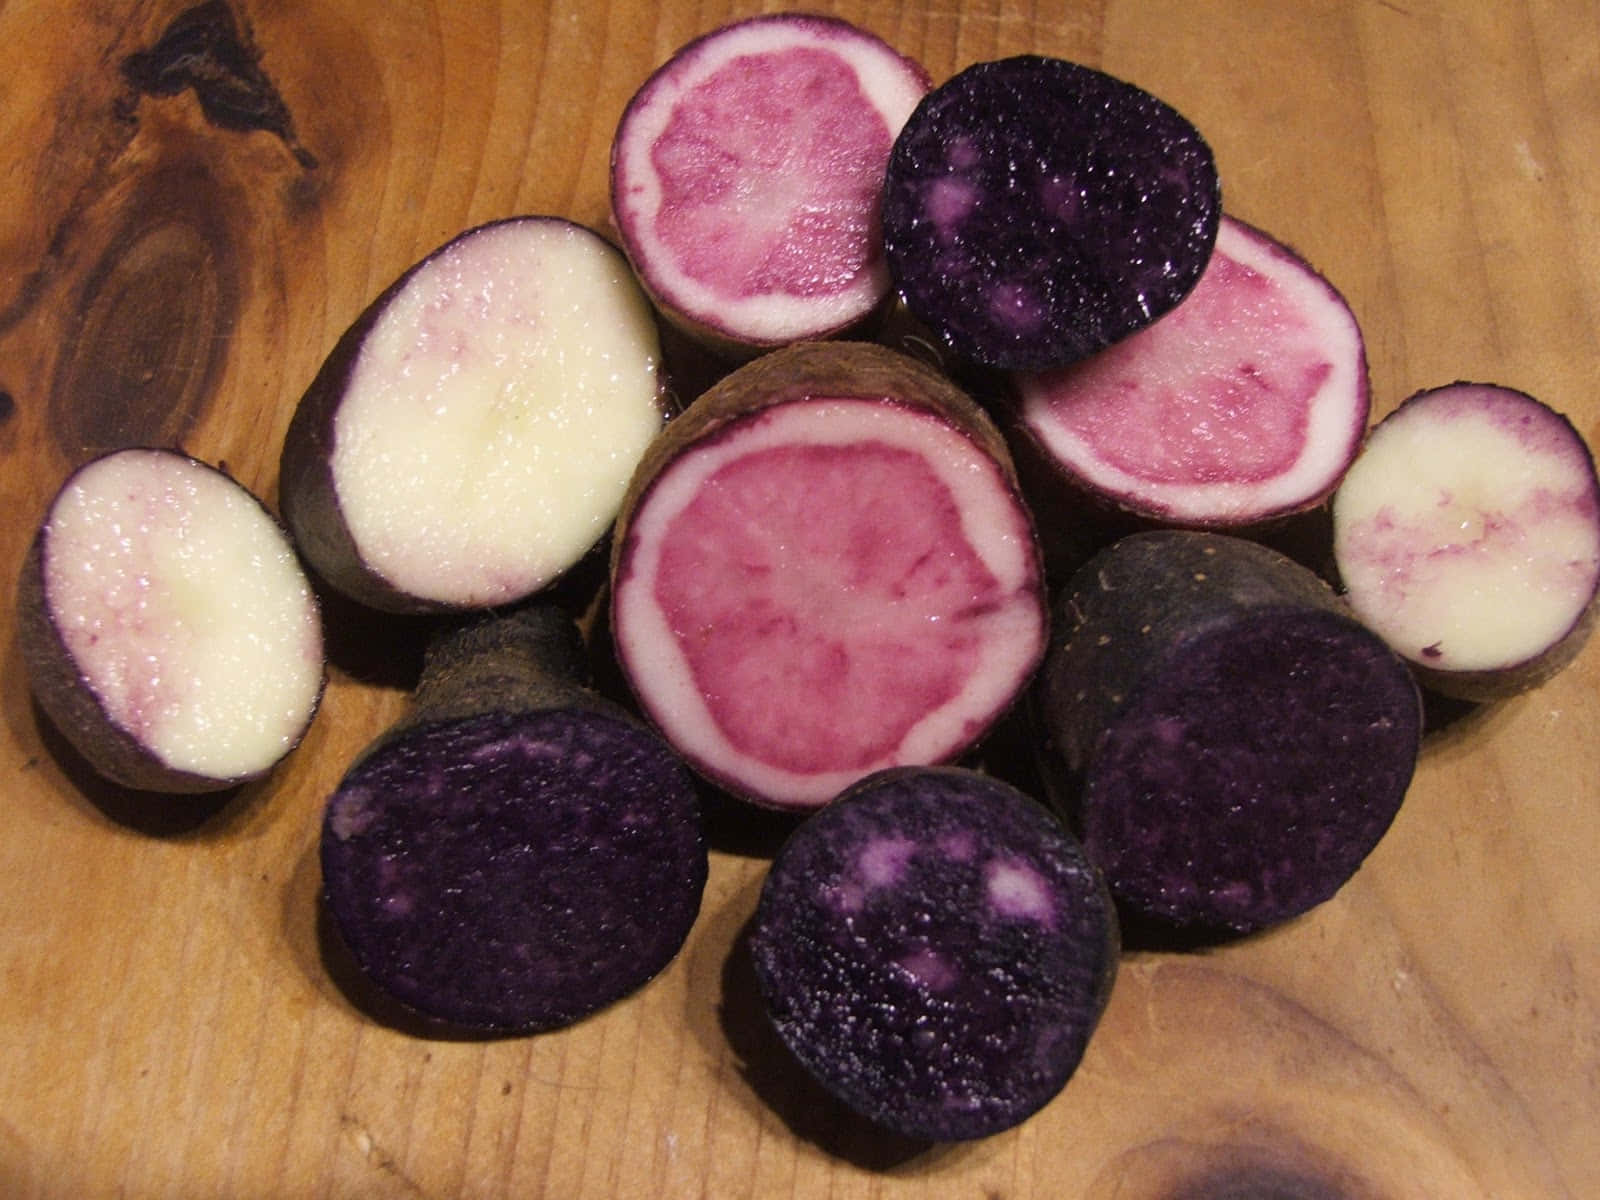 Colorful potatoes come in a variety of sizes and shades - like this Purple Potato at the local farmer's market. Wallpaper